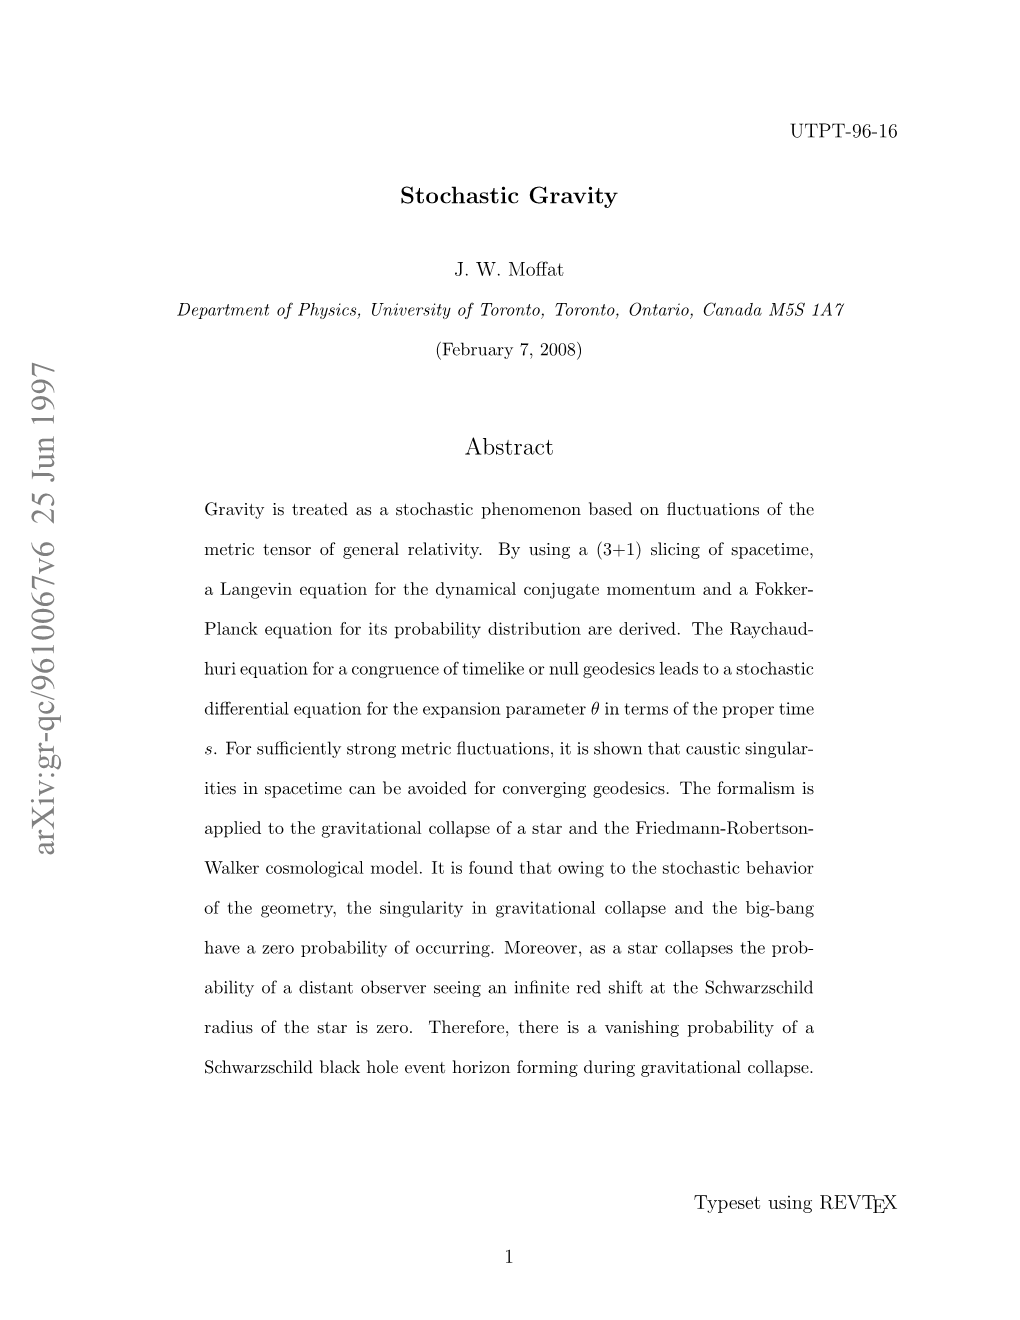 Stochastic Gravity Can Avoid the Occurrence of Singularities in Spacetime